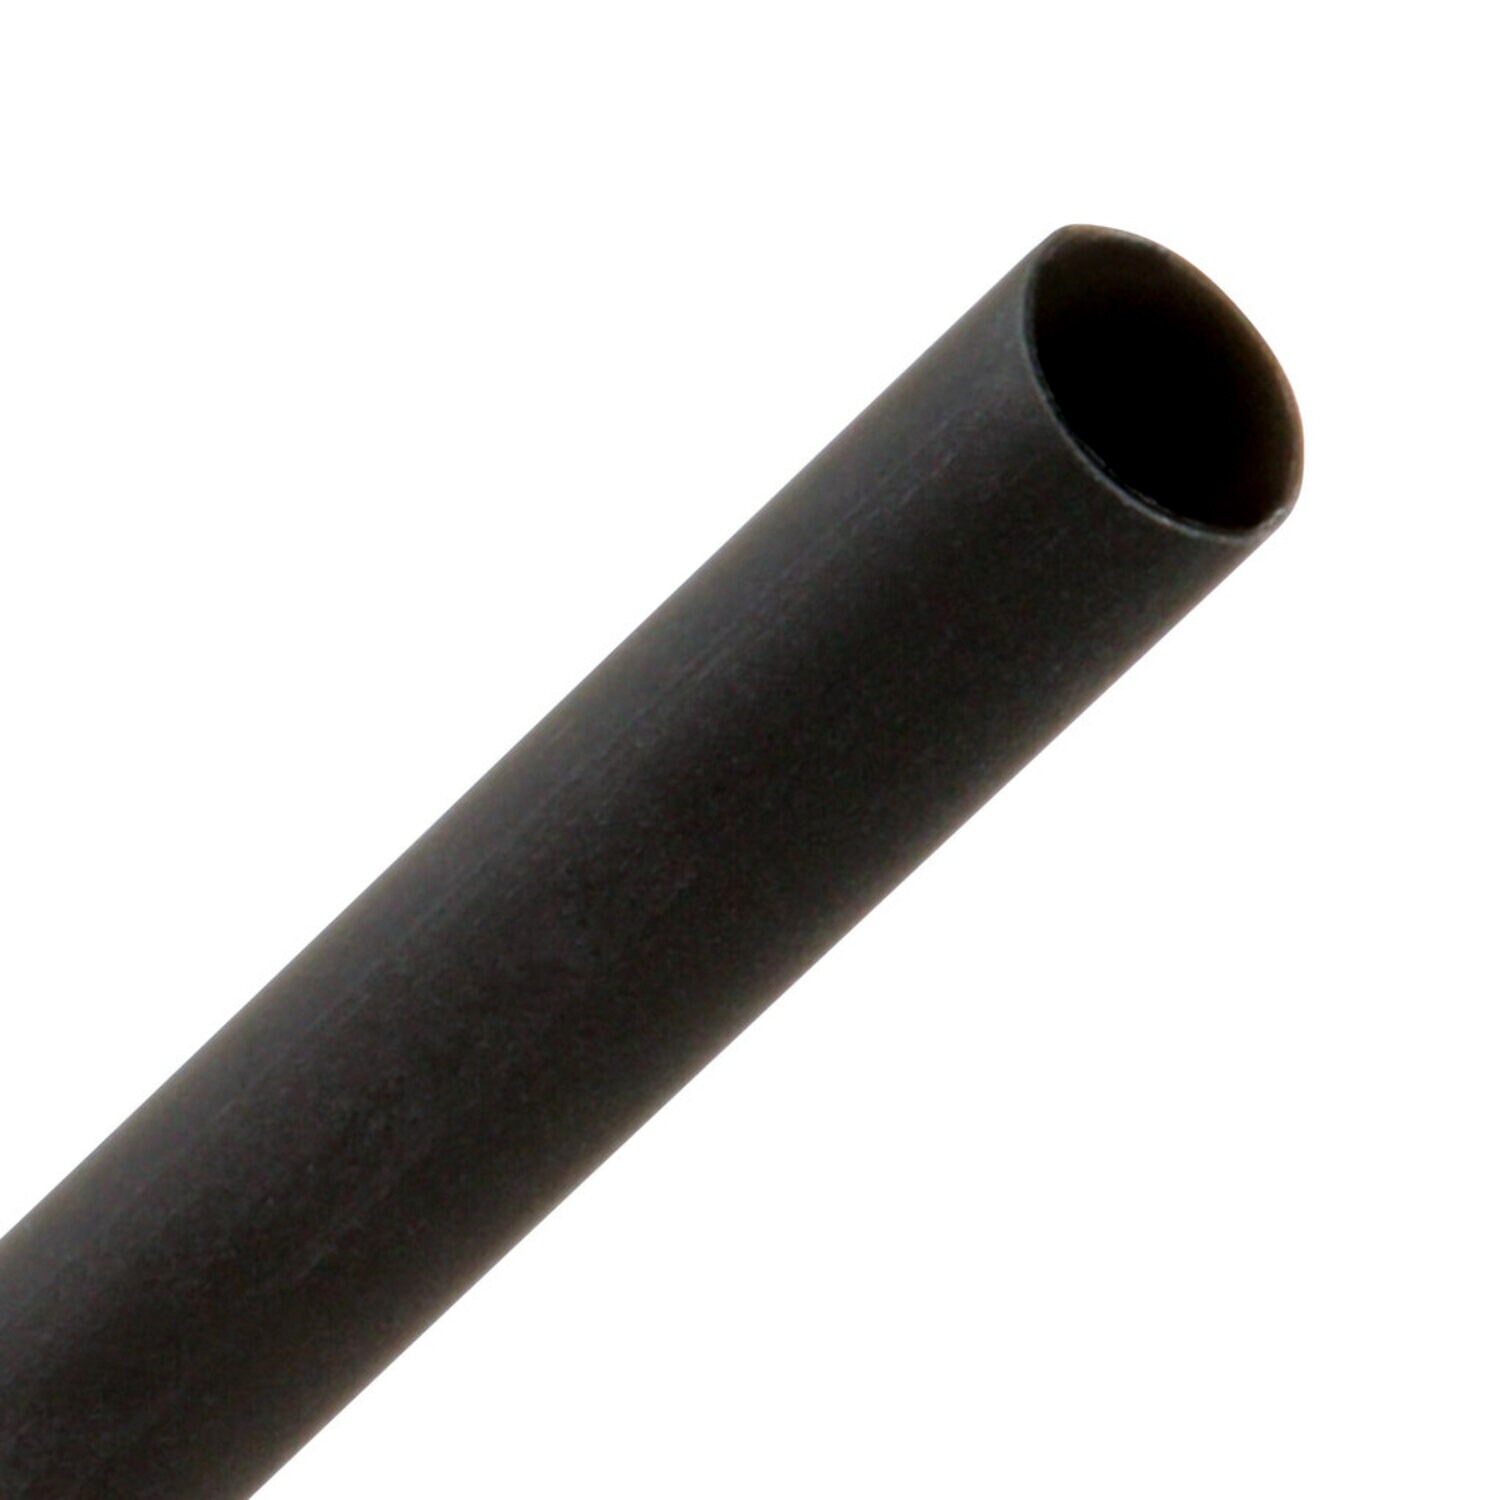 7010351710 - 3M Thin-Wall Heat Shrink Tubing EPS-300, Adhesive-Lined, 1/4" Black
48-in sticks, 12/Case